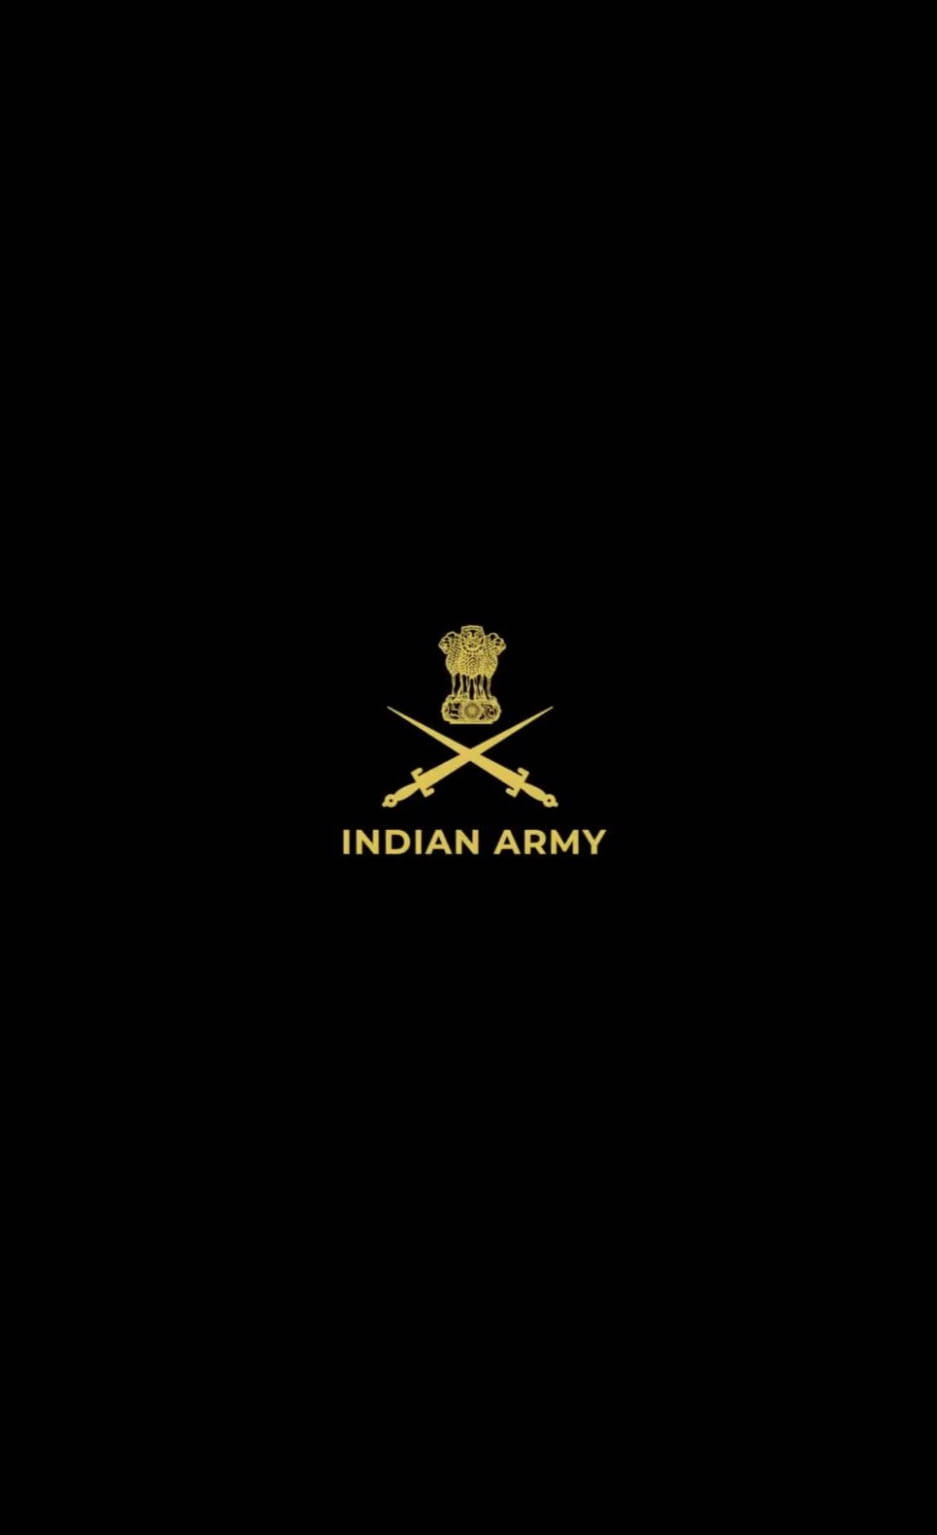 Best Indian Army DP Images [currentyear] Free Download - Image Diamond